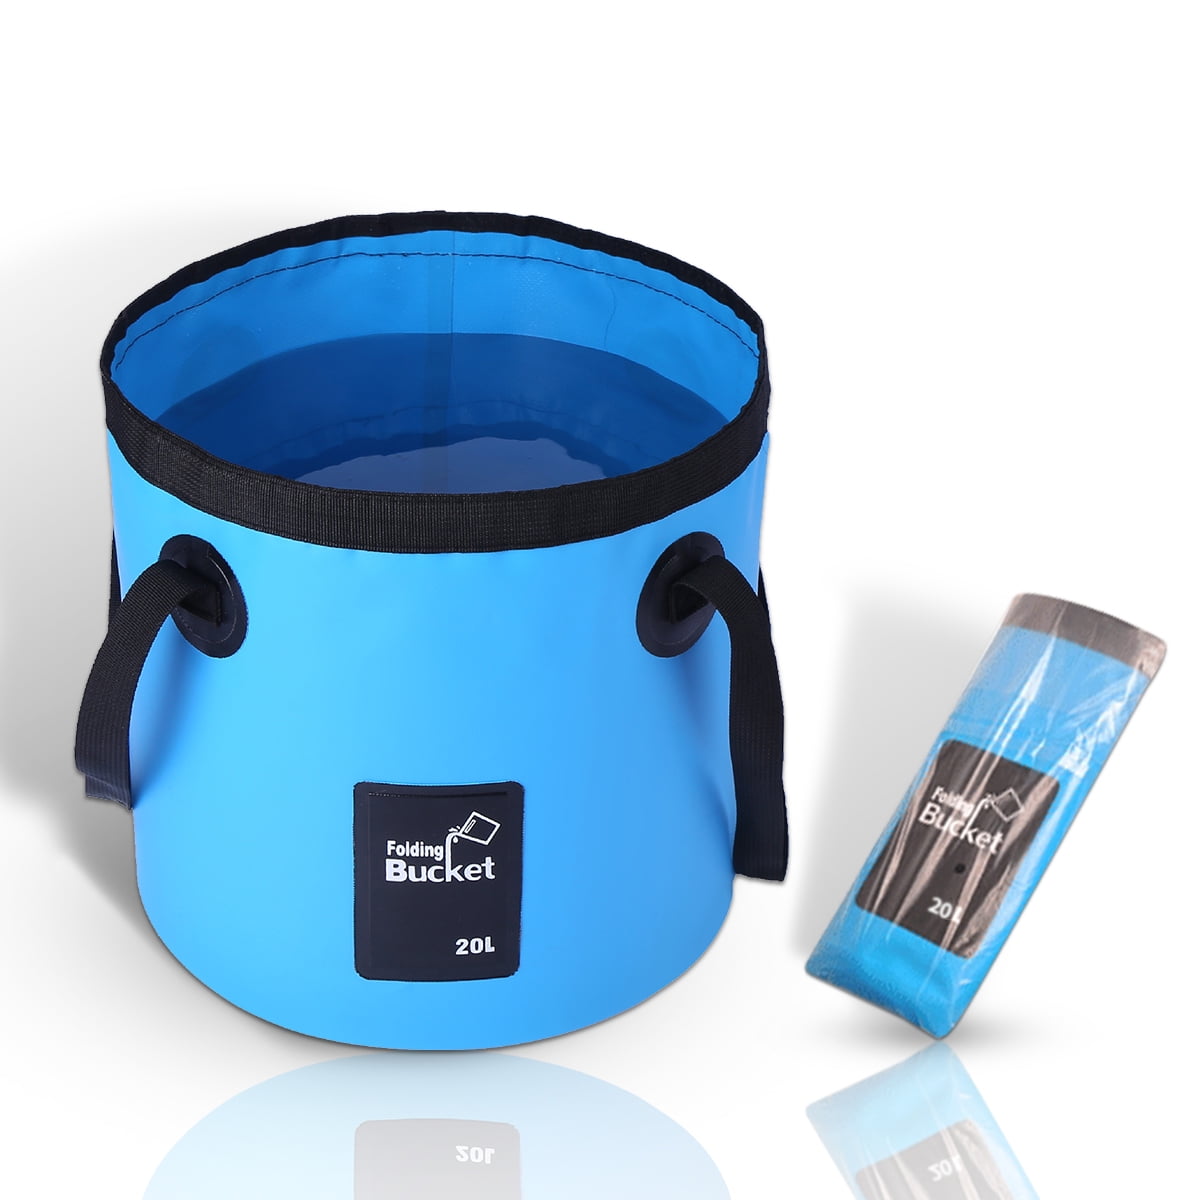  3 Pcs 5 Gallon Bucket Collapsible Foldable Bucket with Handle  for Camping Fishing Hiking to Hold Water Folding Container Carry Bag  Multiple Use Portable Fold up Lightweight(Blue) : Sports & Outdoors